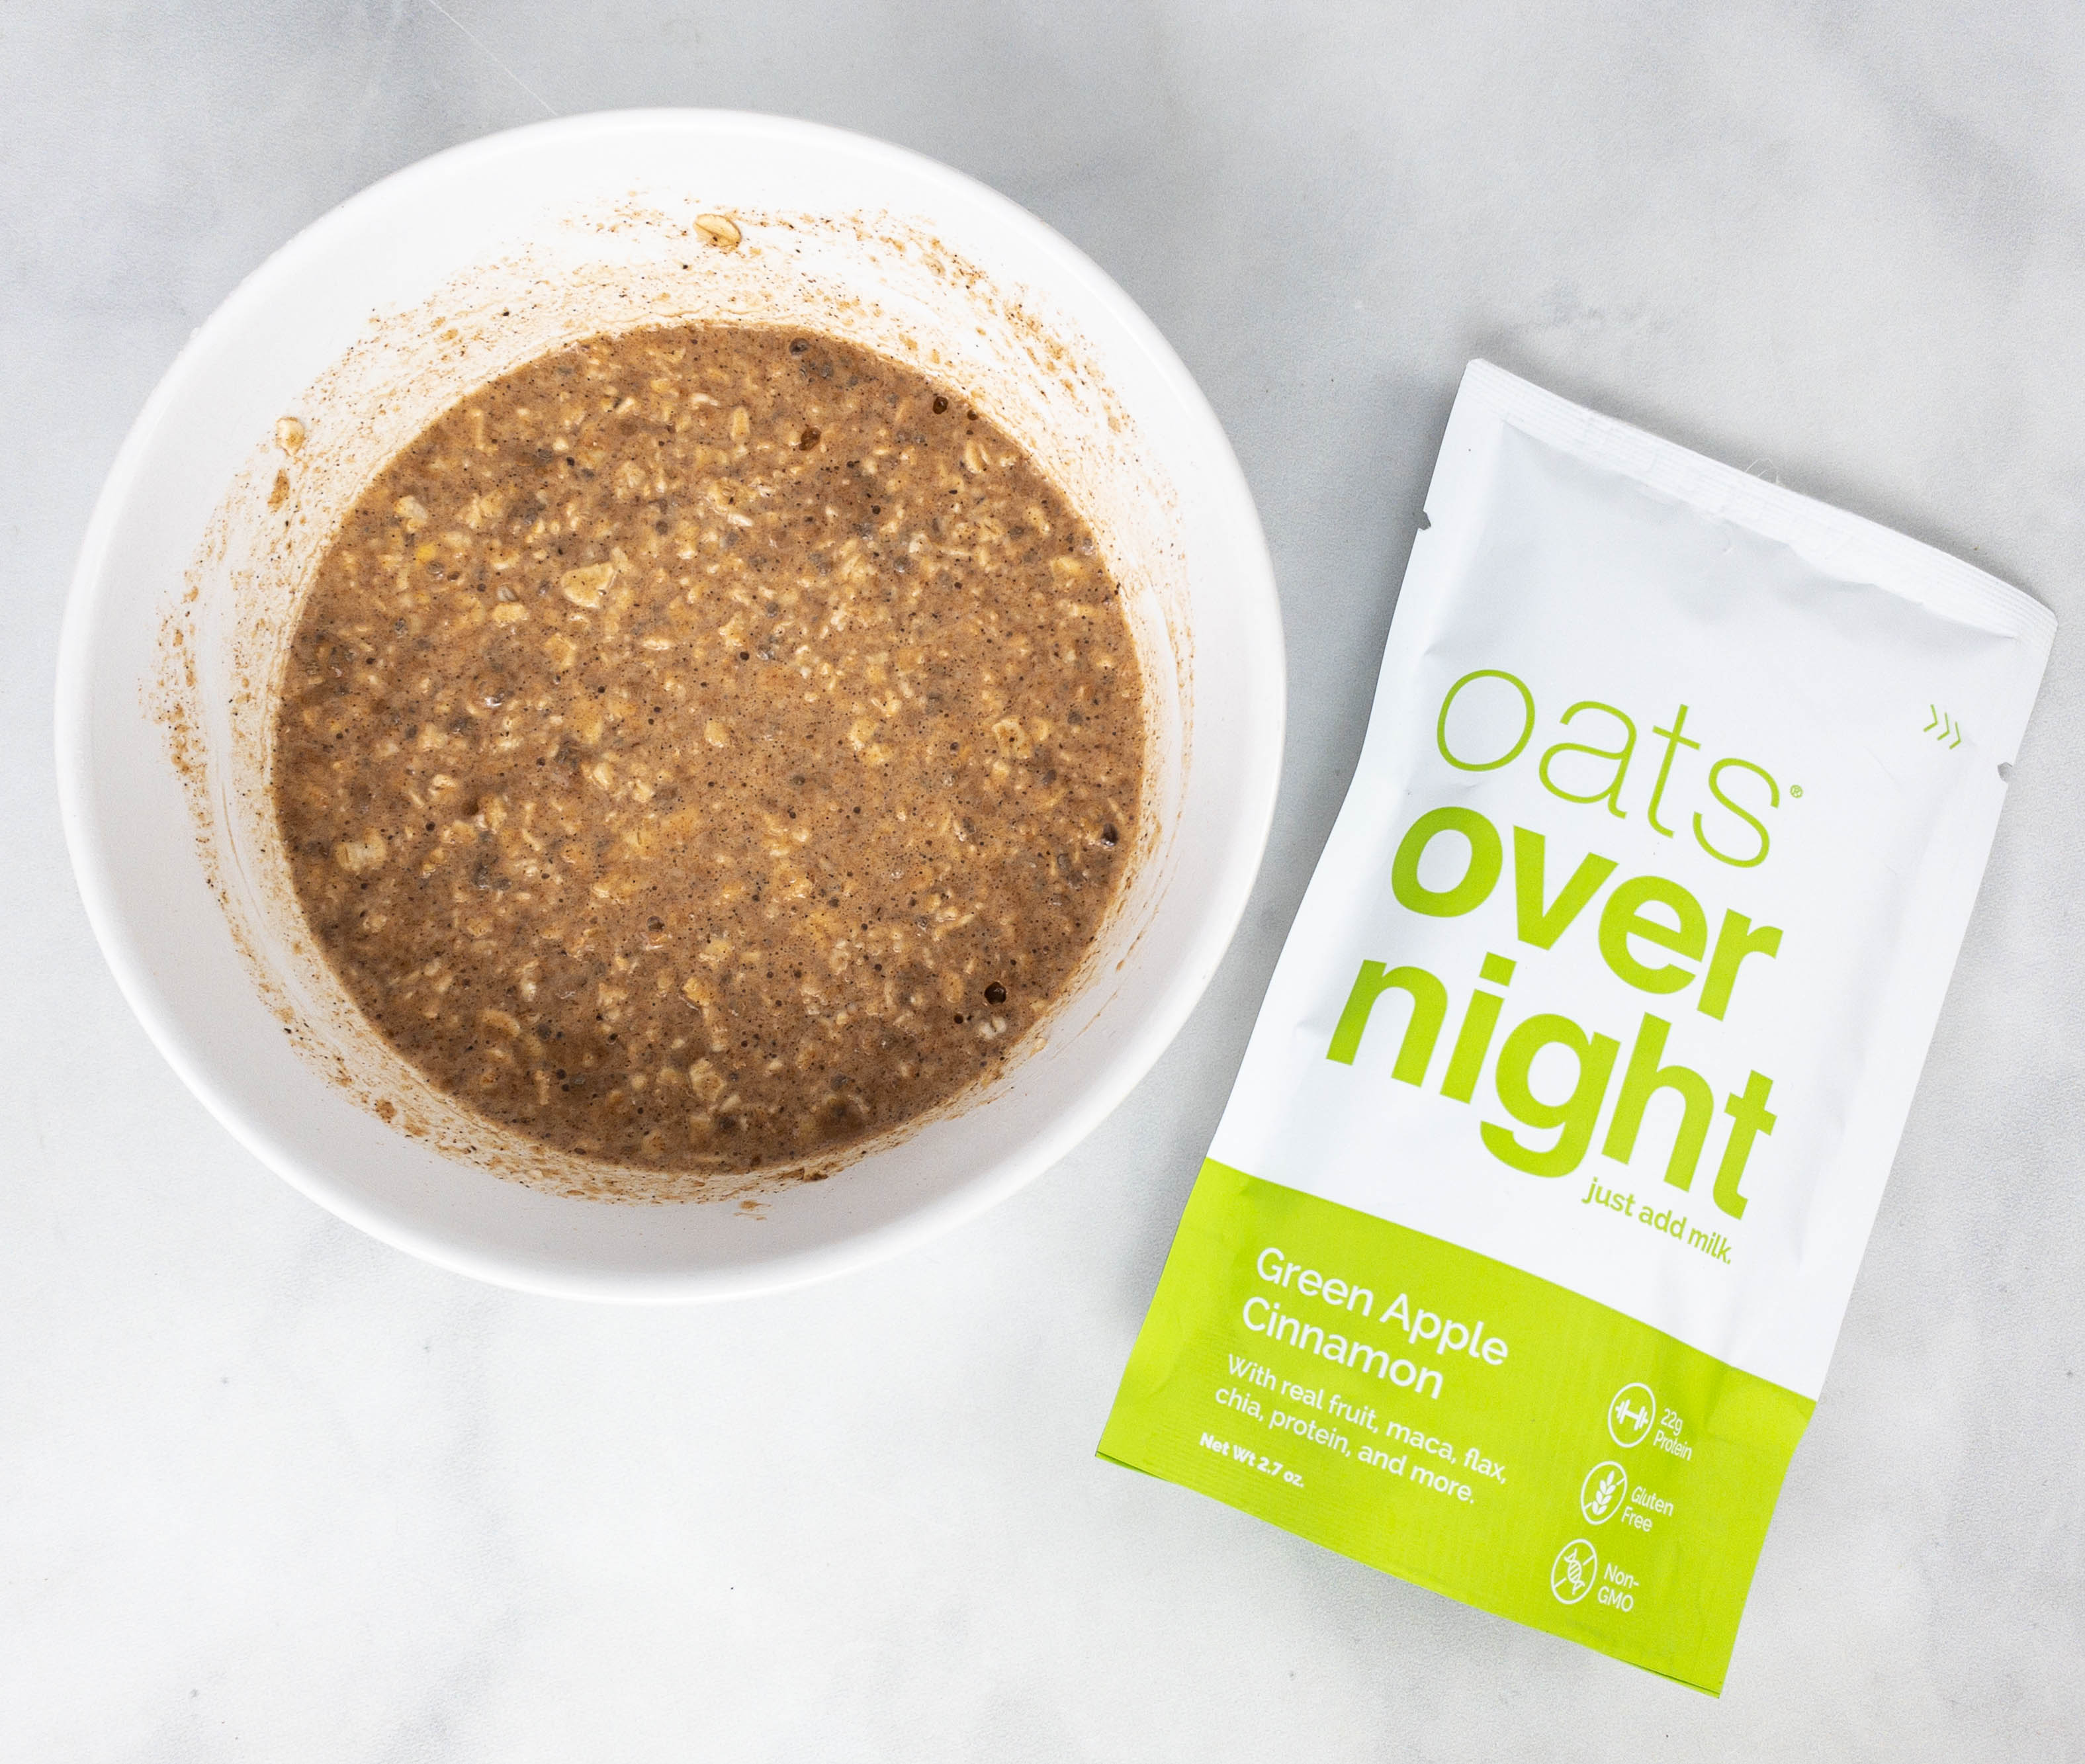 https://hellosubscription.com/wp-content/uploads/2021/05/oats-overnight-review-41.jpg?quality=90&strip=all